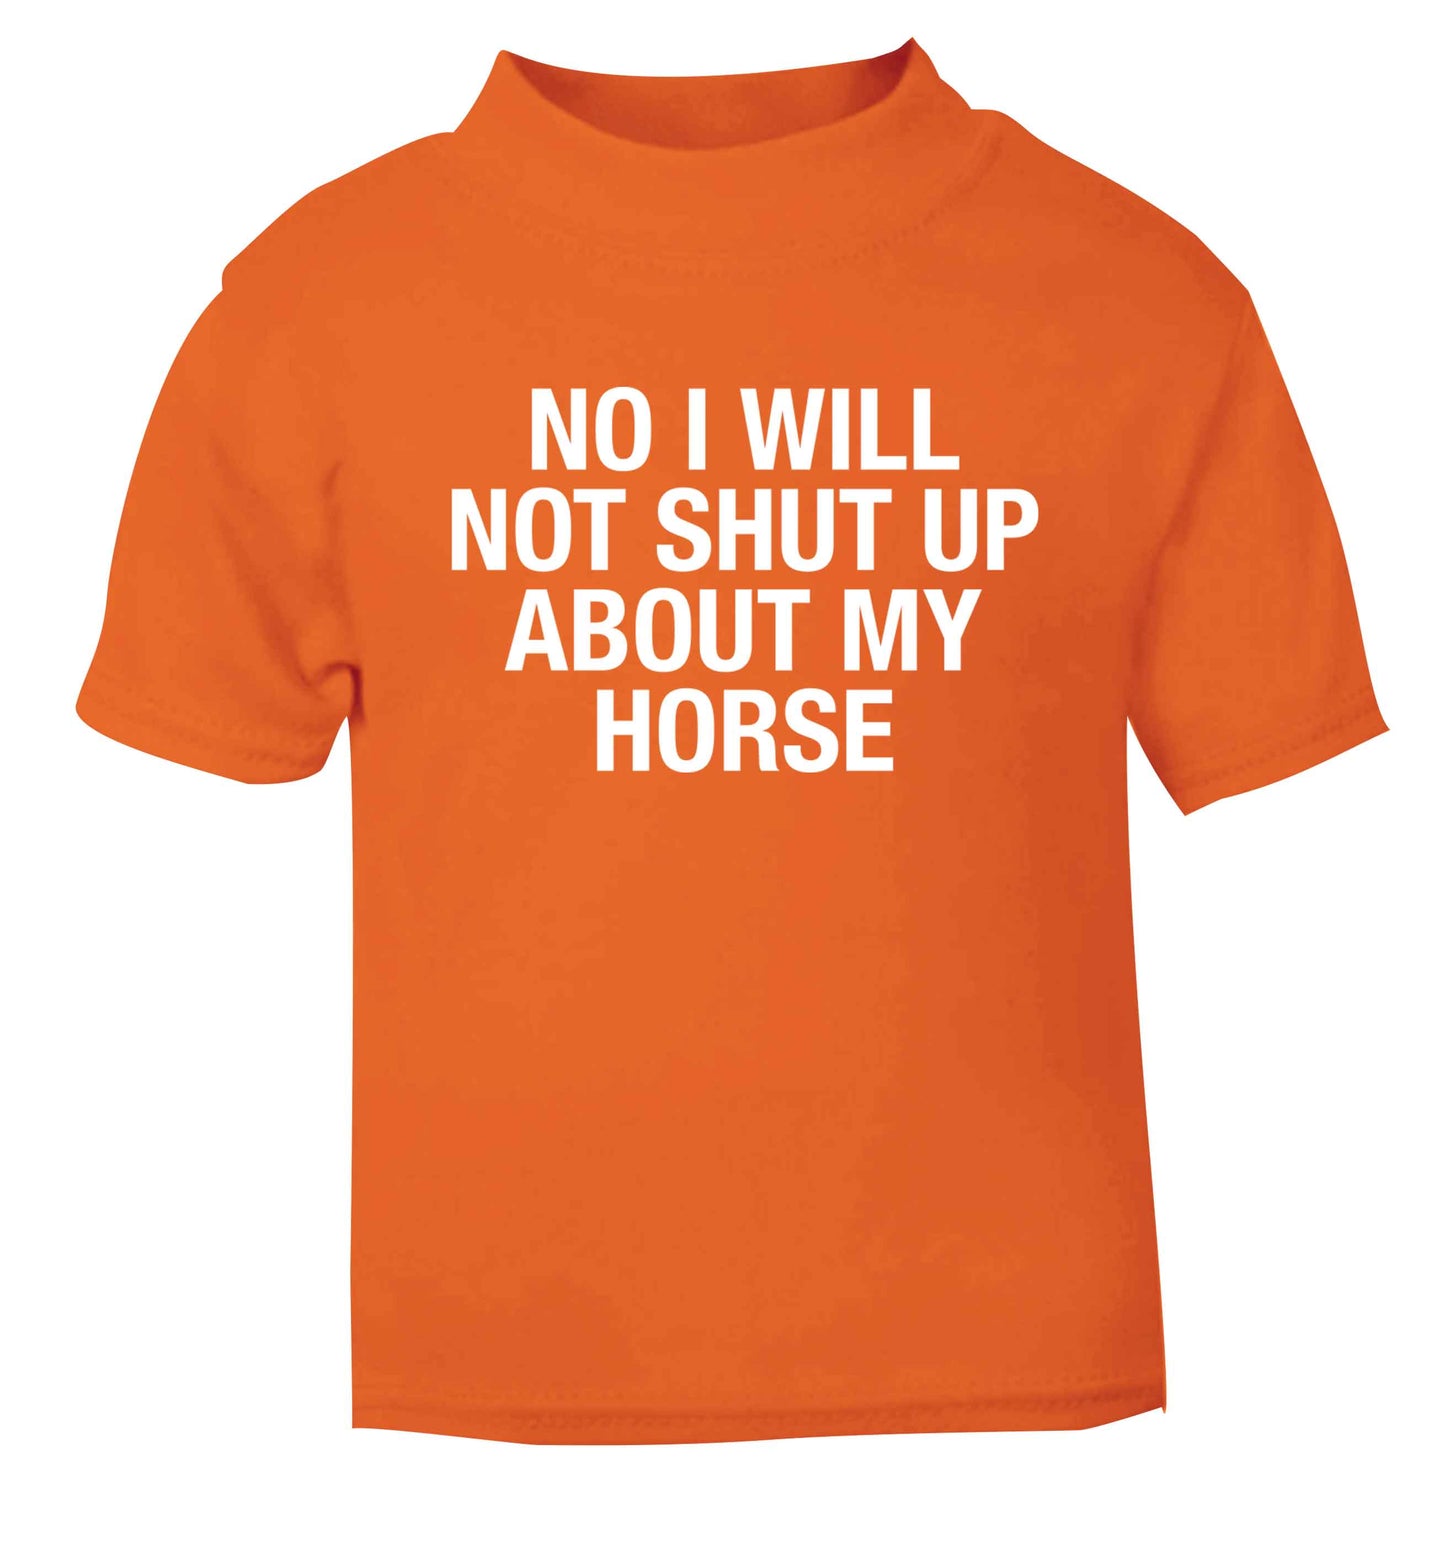 No I will not shut up talking about my horse orange baby toddler Tshirt 2 Years